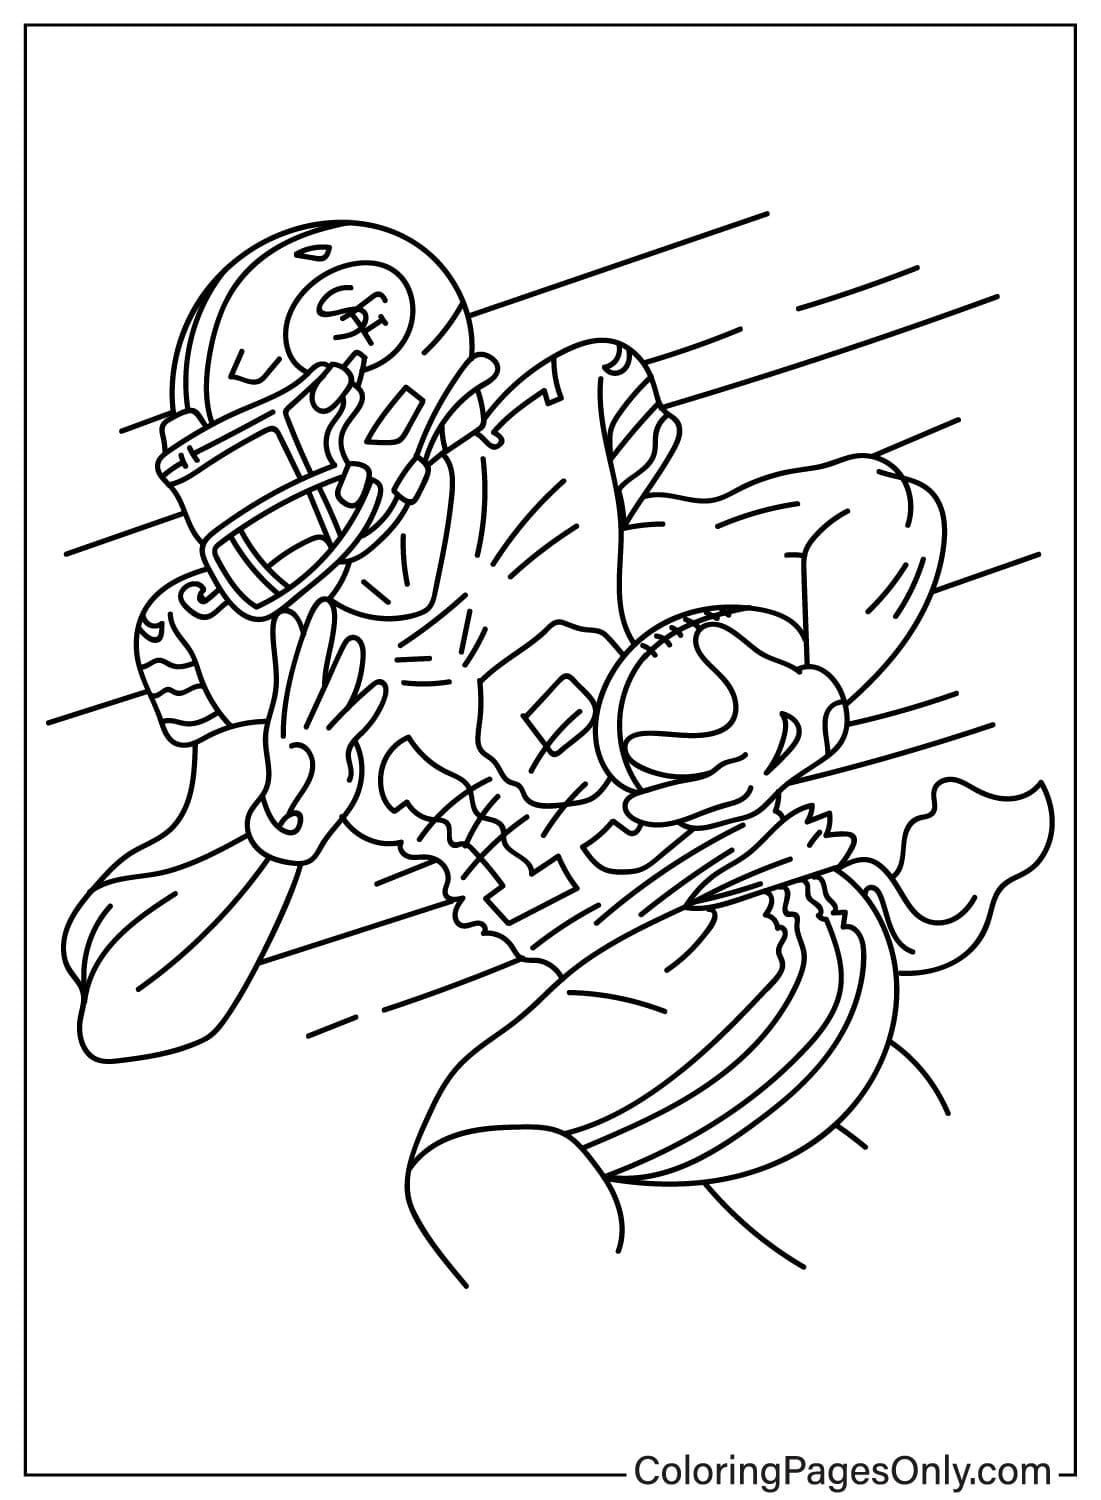 Deebo Samuel Coloring Page from San Francisco 49ers